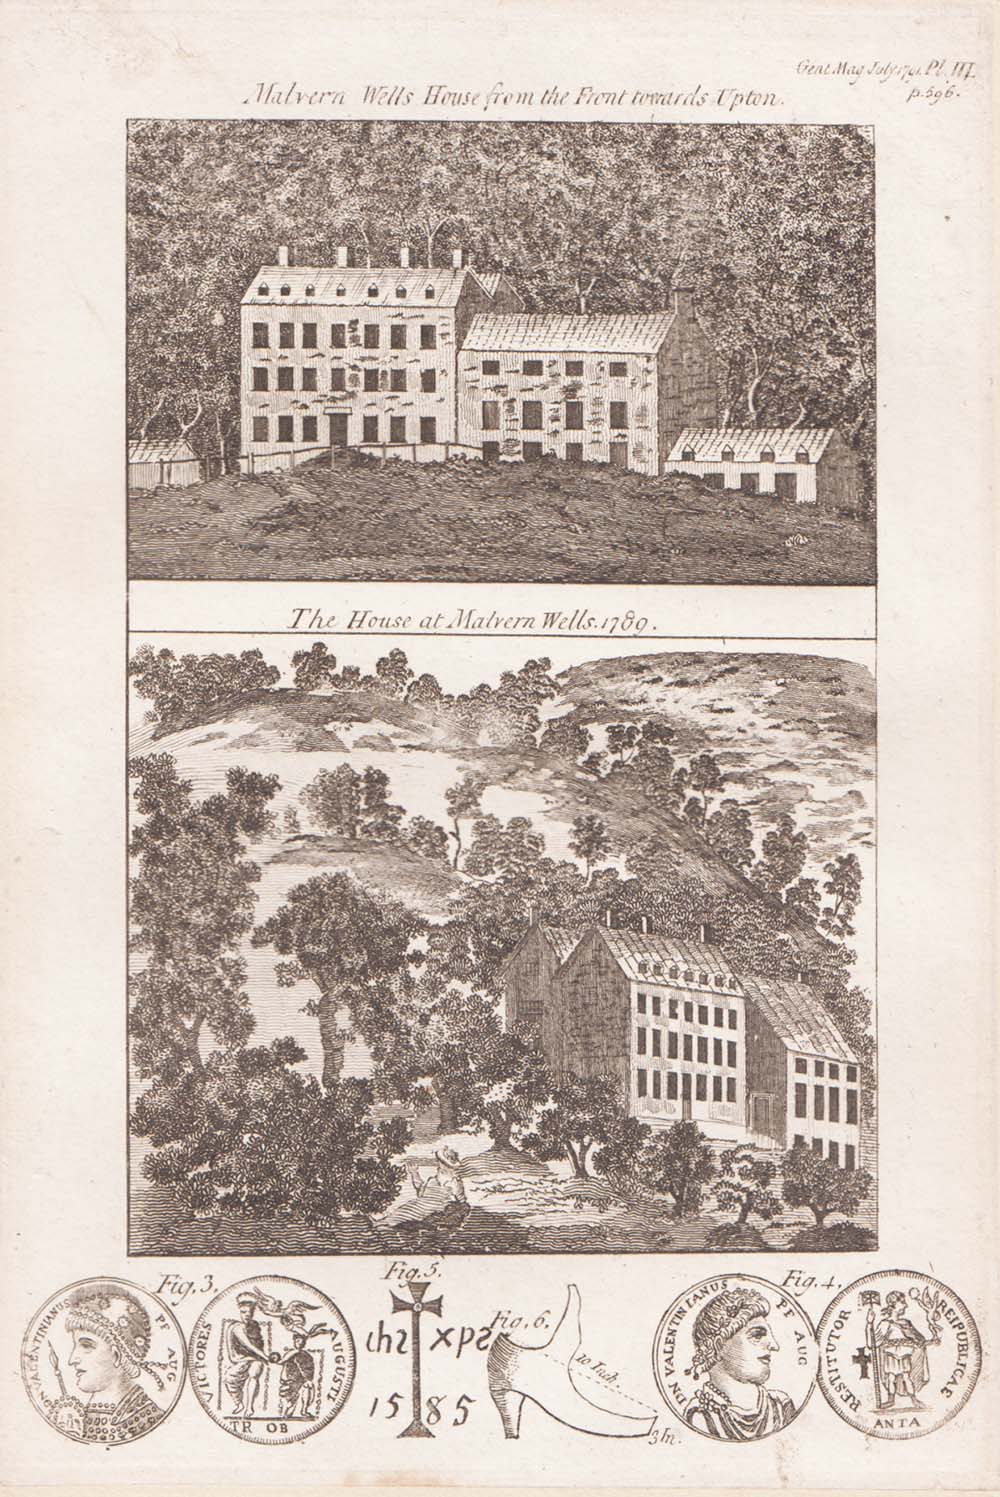 Malvern Wells House from the Front towards Upton / The House at Malvern Wells 1789